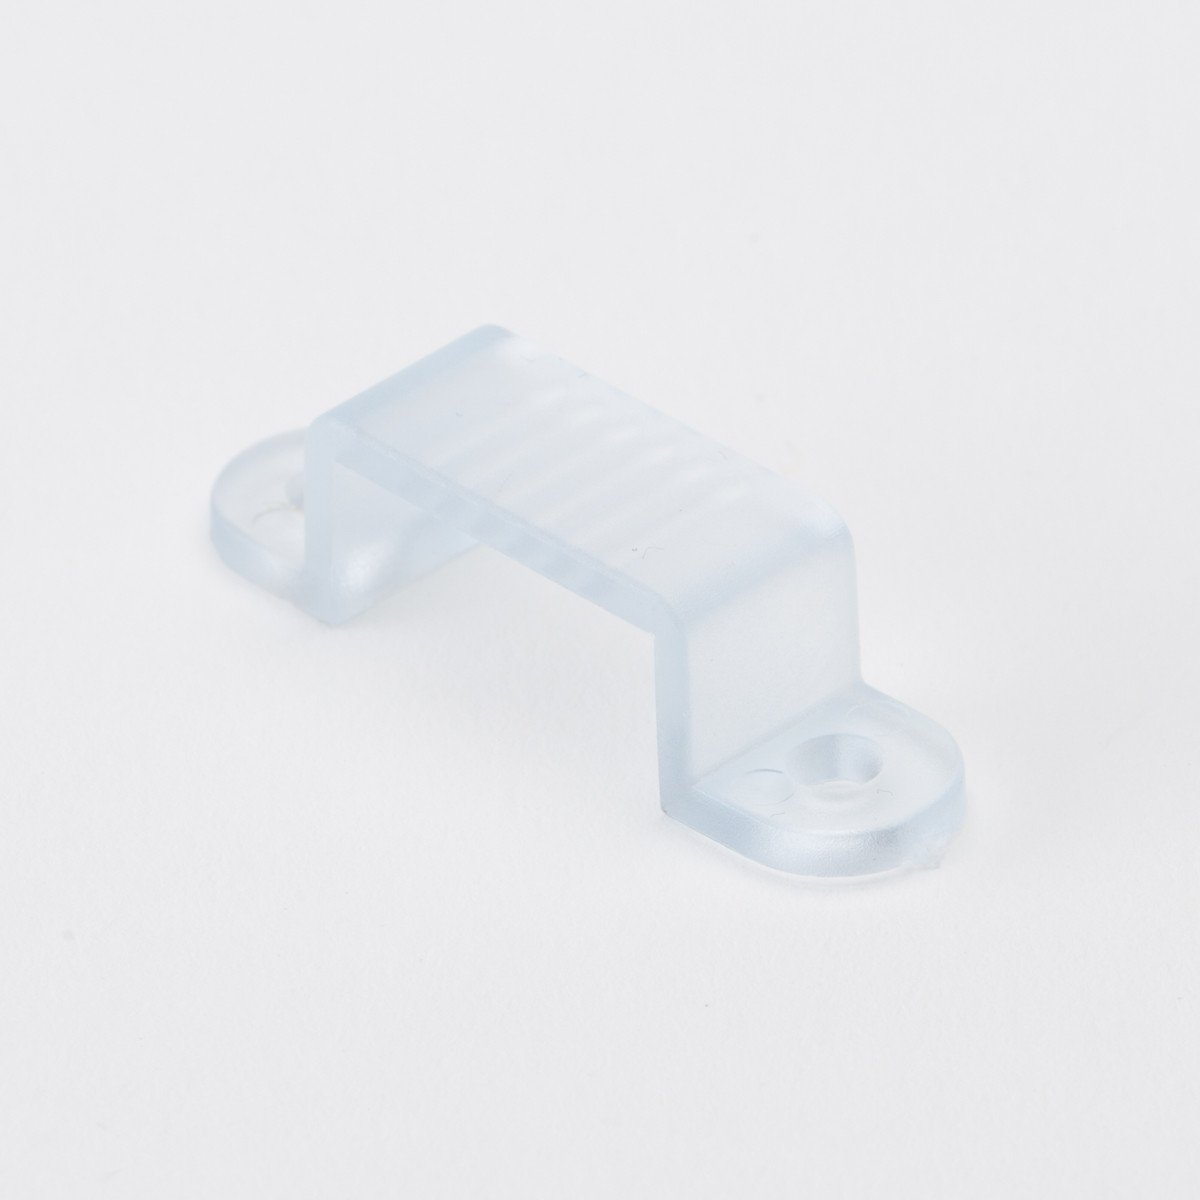 clear mounting bracket with screw holes